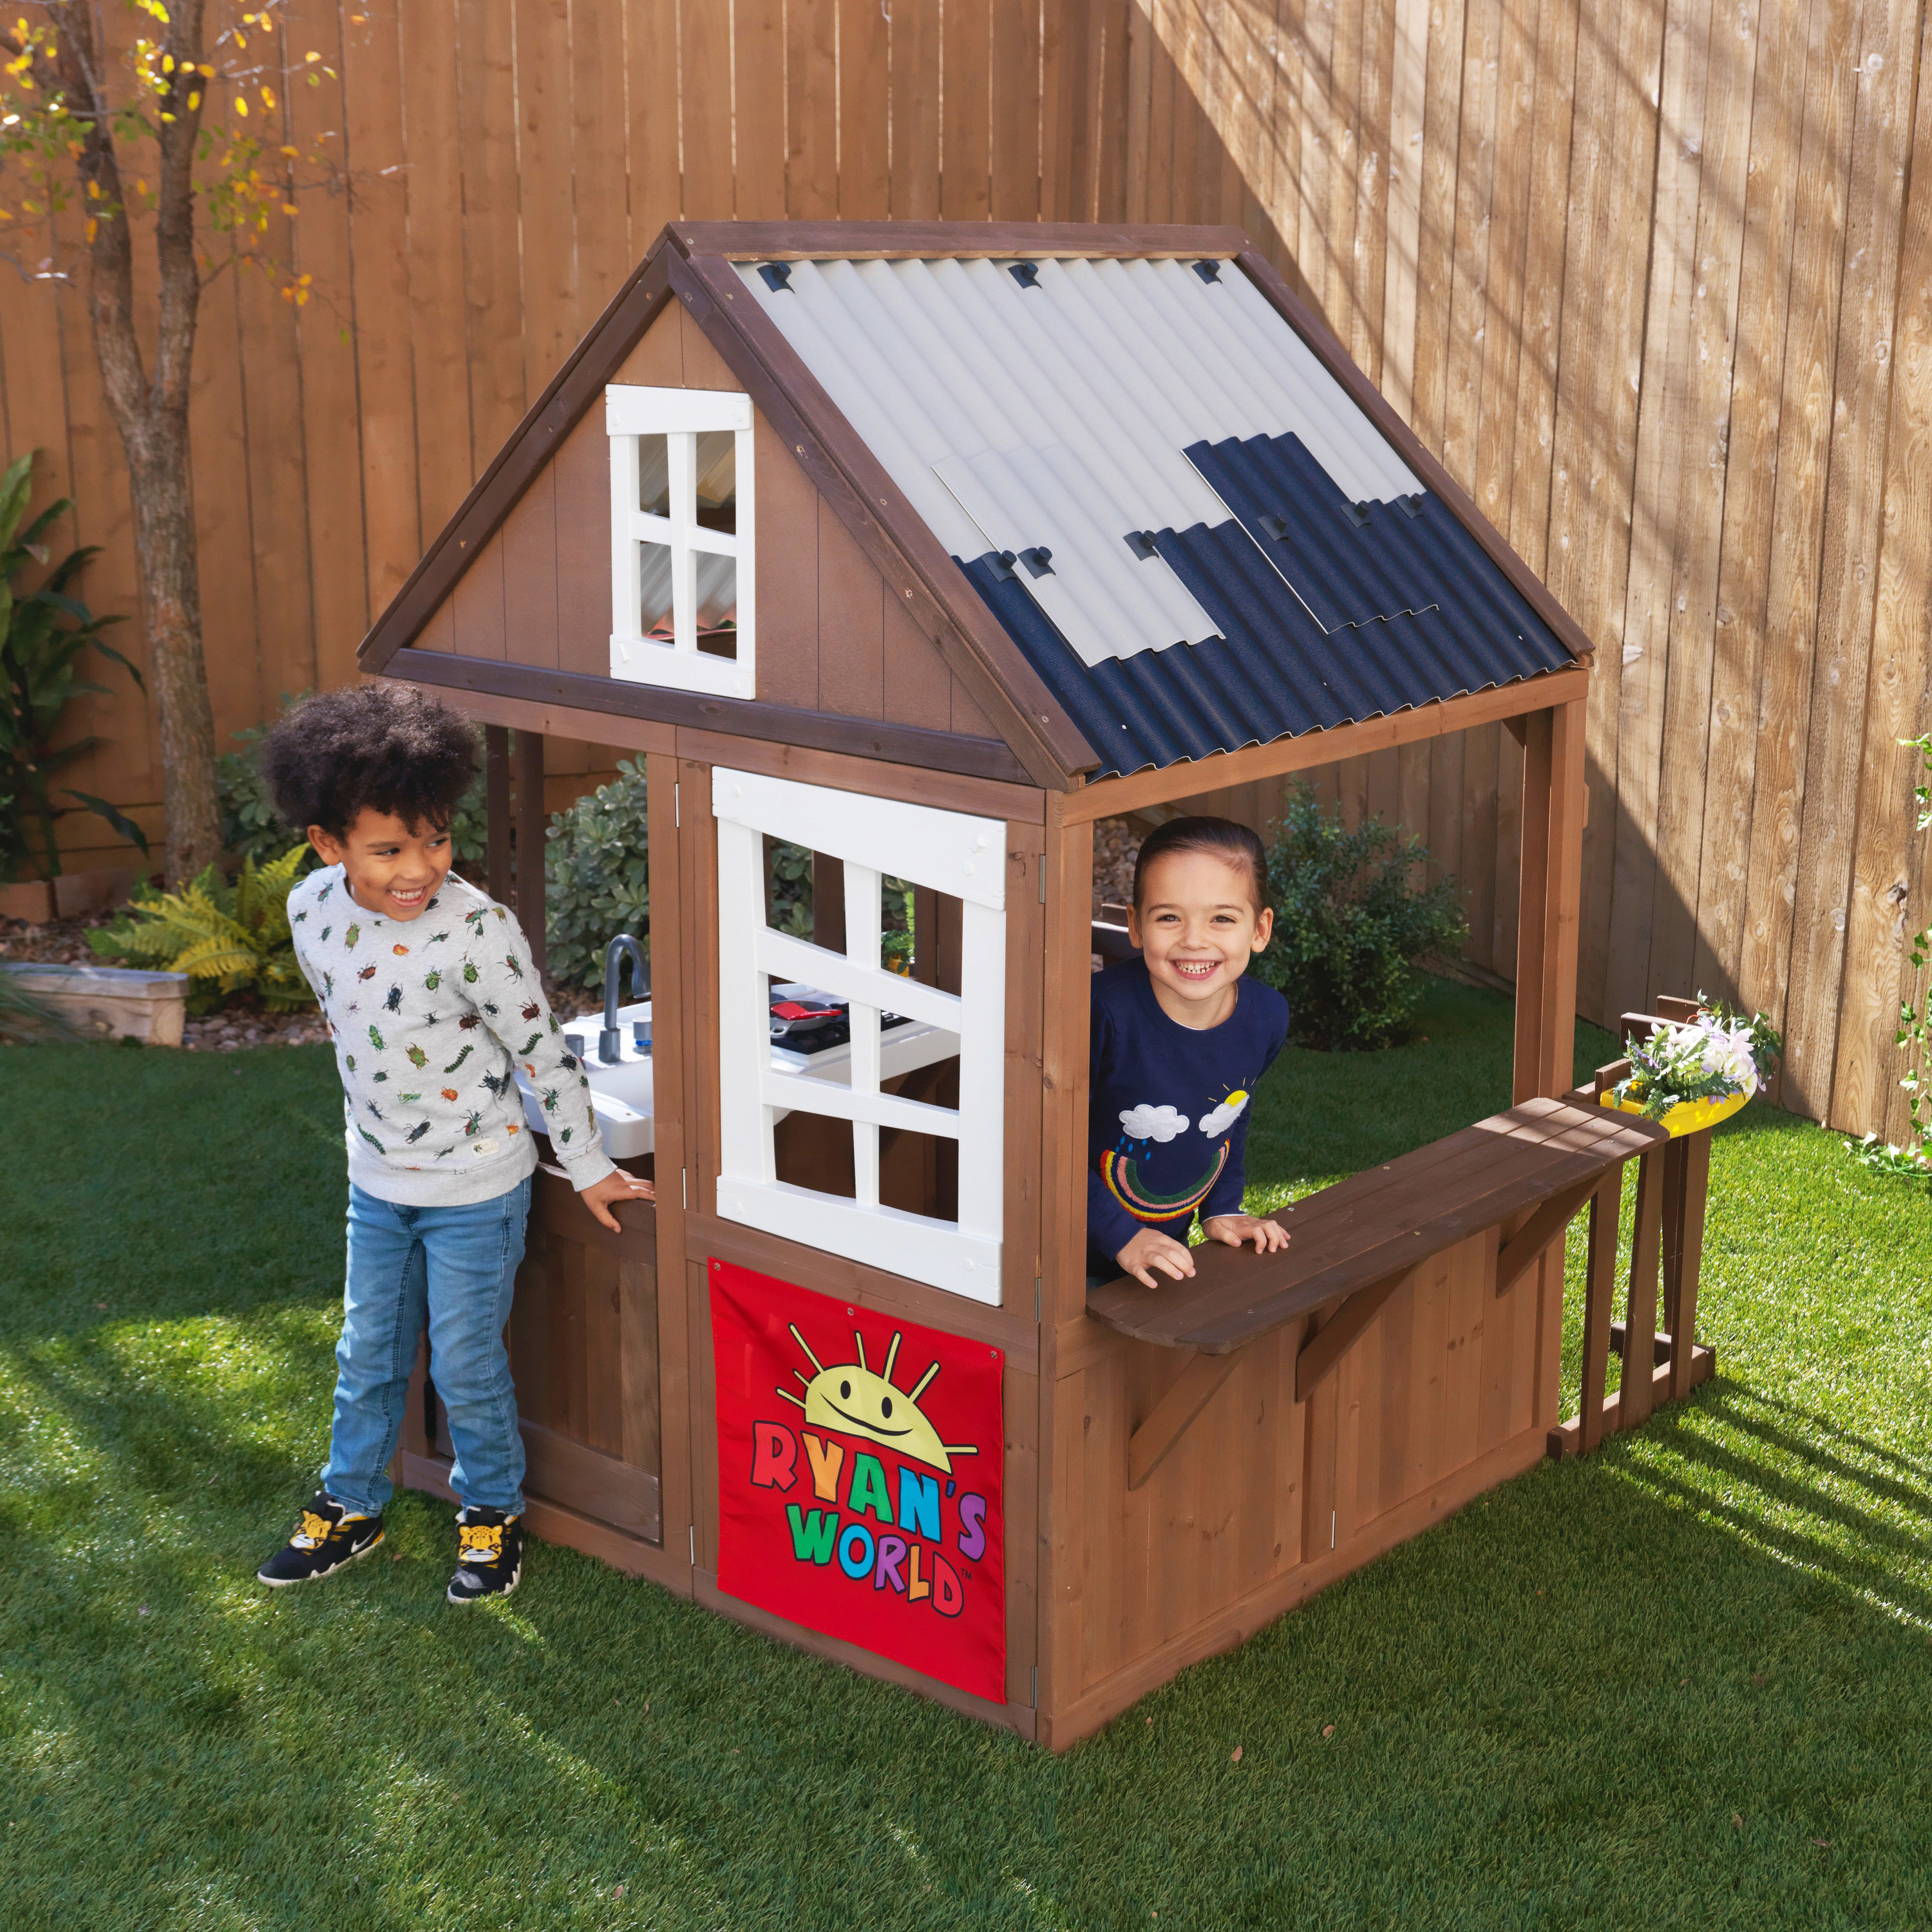 Two children playing in the playhouse